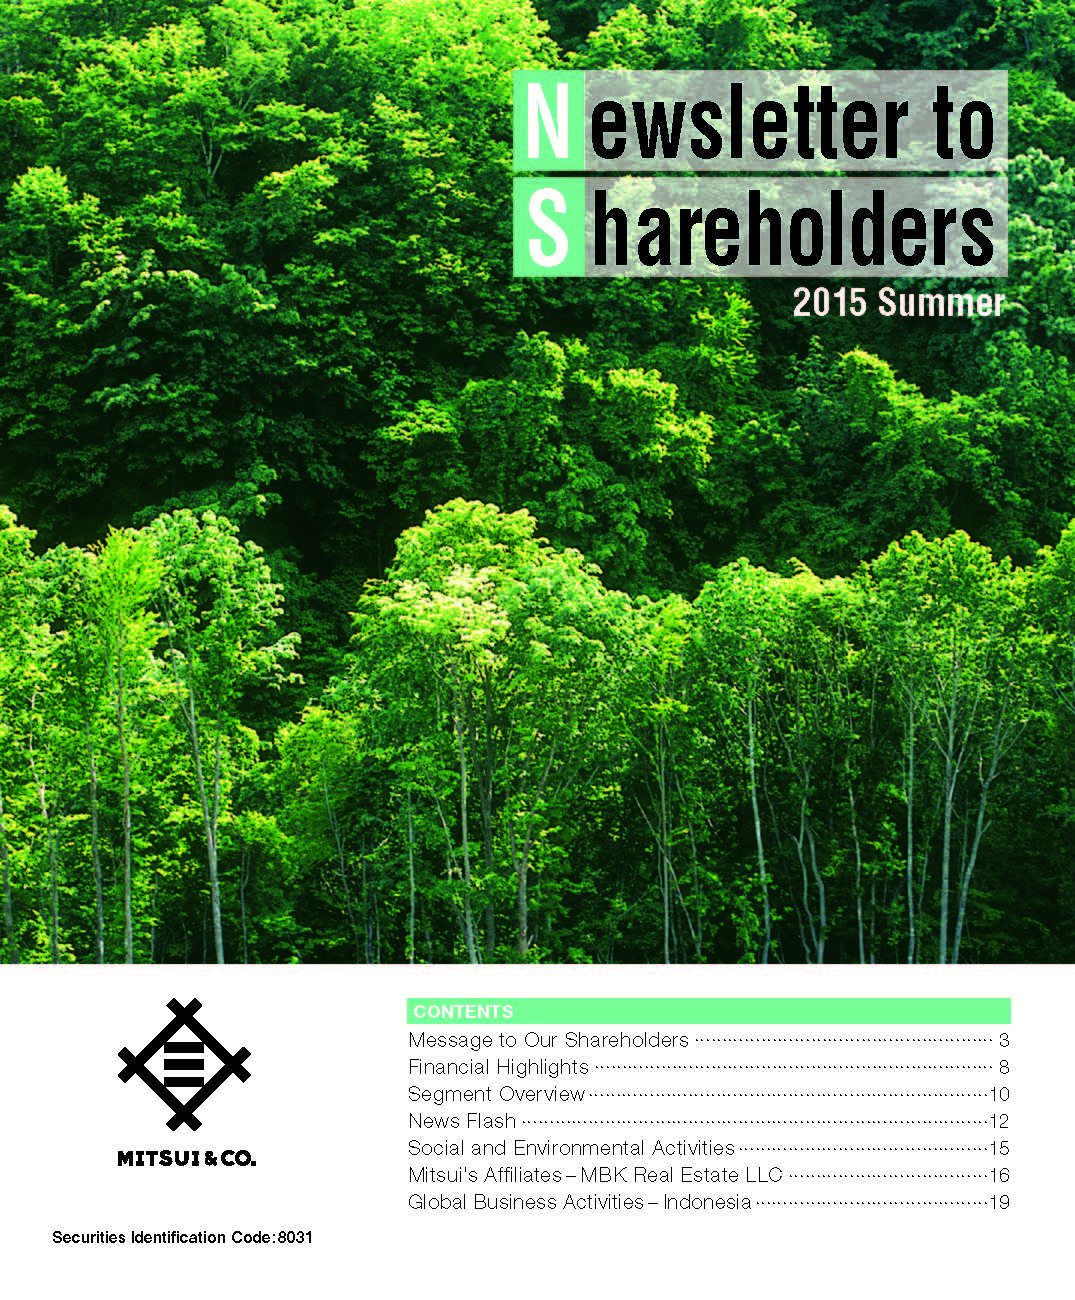 2015 Summer (Date of Issue: June 19, 2015)